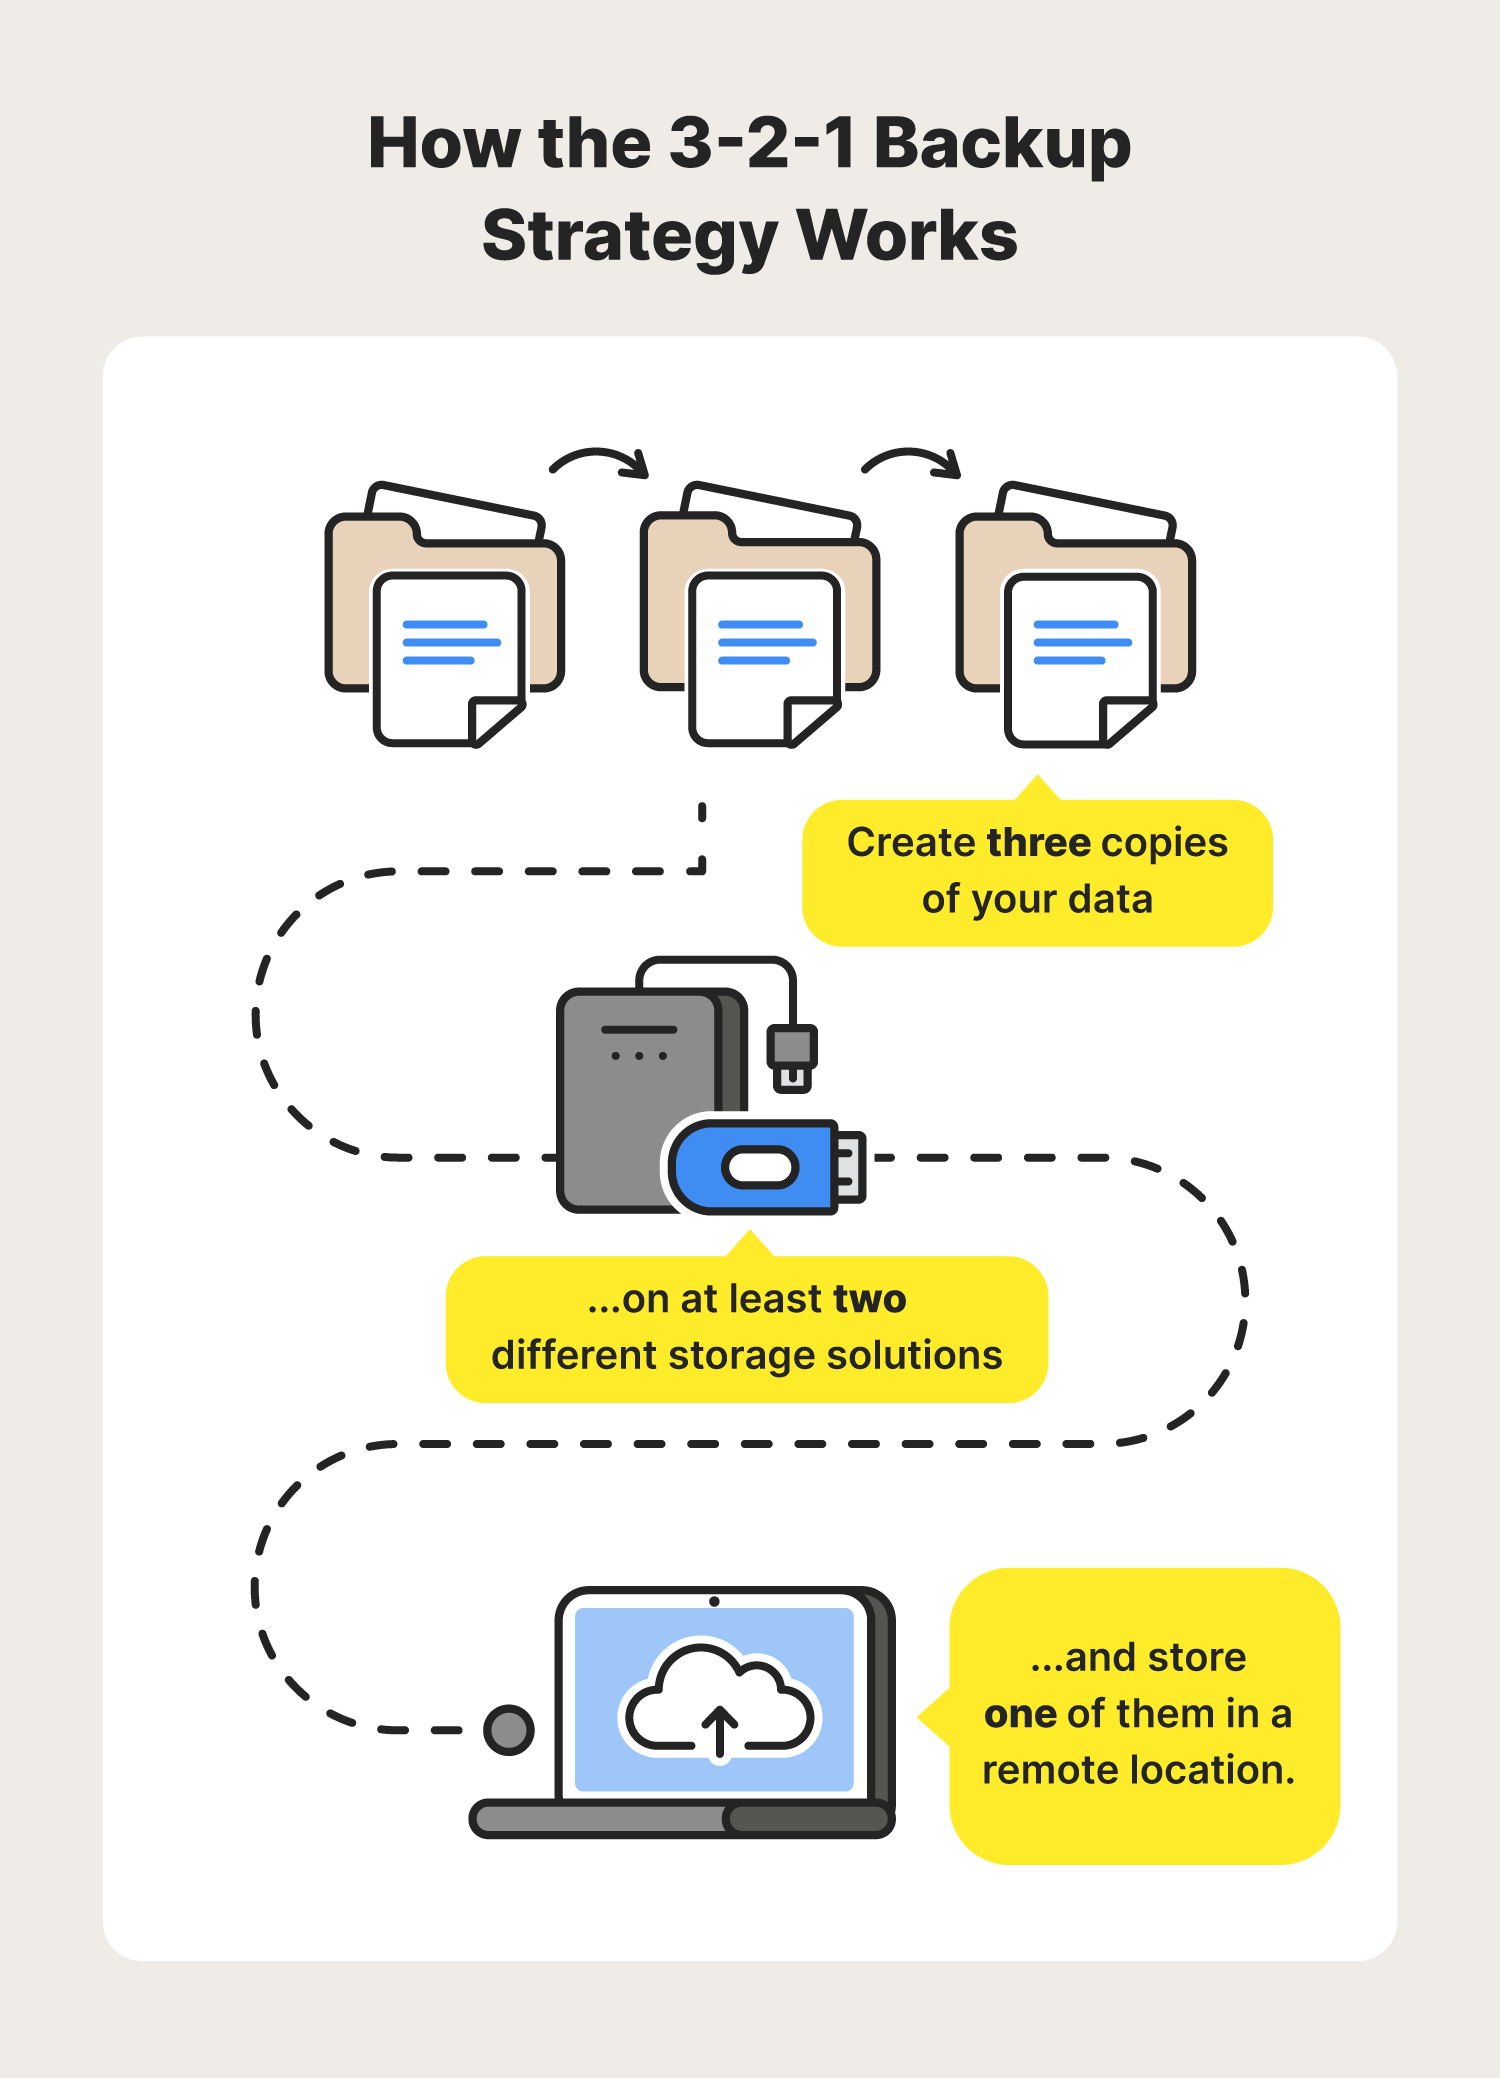 A graphic covers the 3-2-1 backup strategy, a popular data backup method.